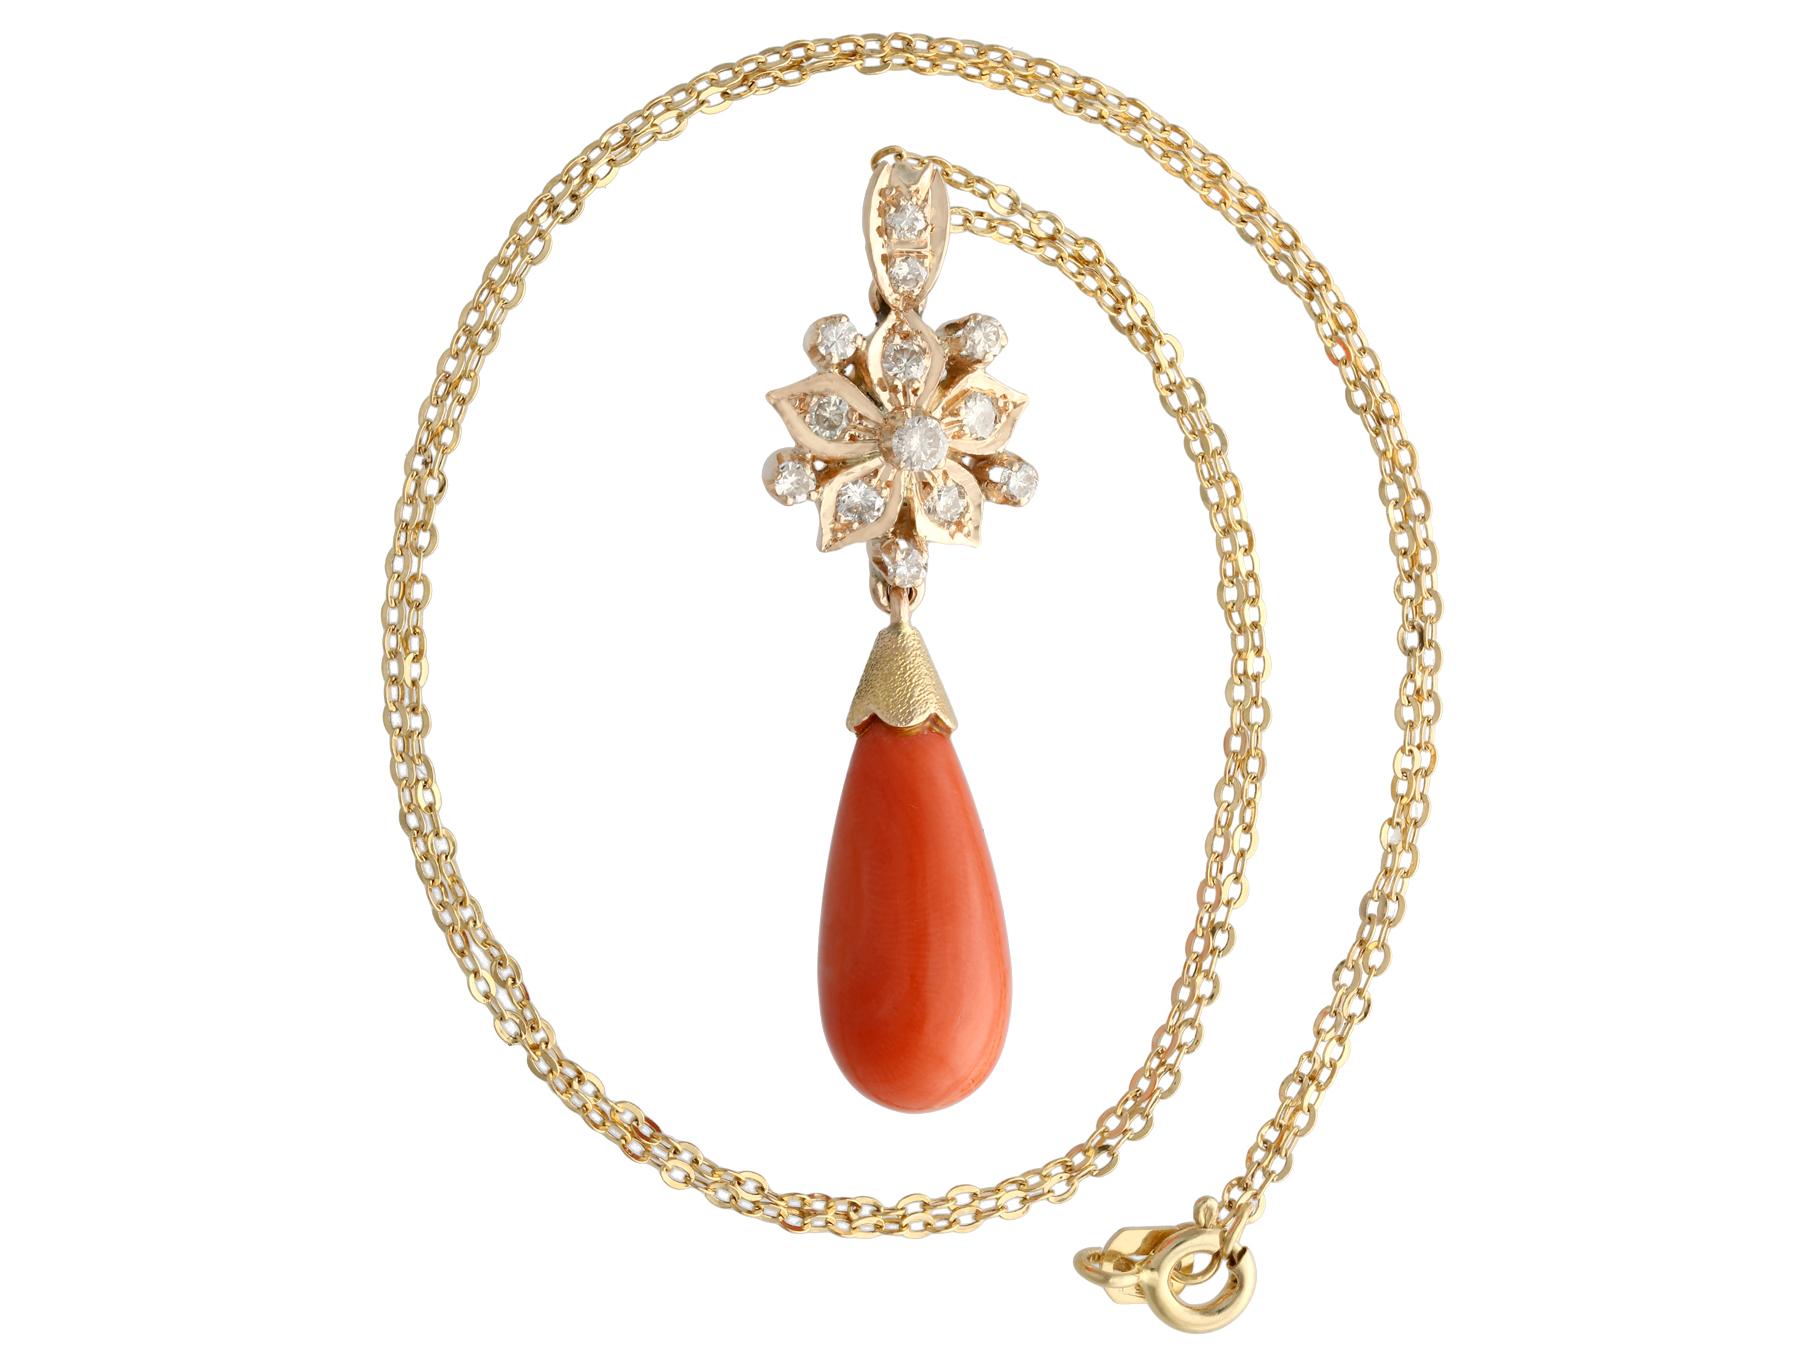 A fine and impressive vintage 7.62 carat coral and 0.40 carat diamond, 14 karat yellow gold pendant and chain; part of our diverse vintage jewelry and estate jewelry collections.

This stunning, fine and impressive coral vintage pendant has been